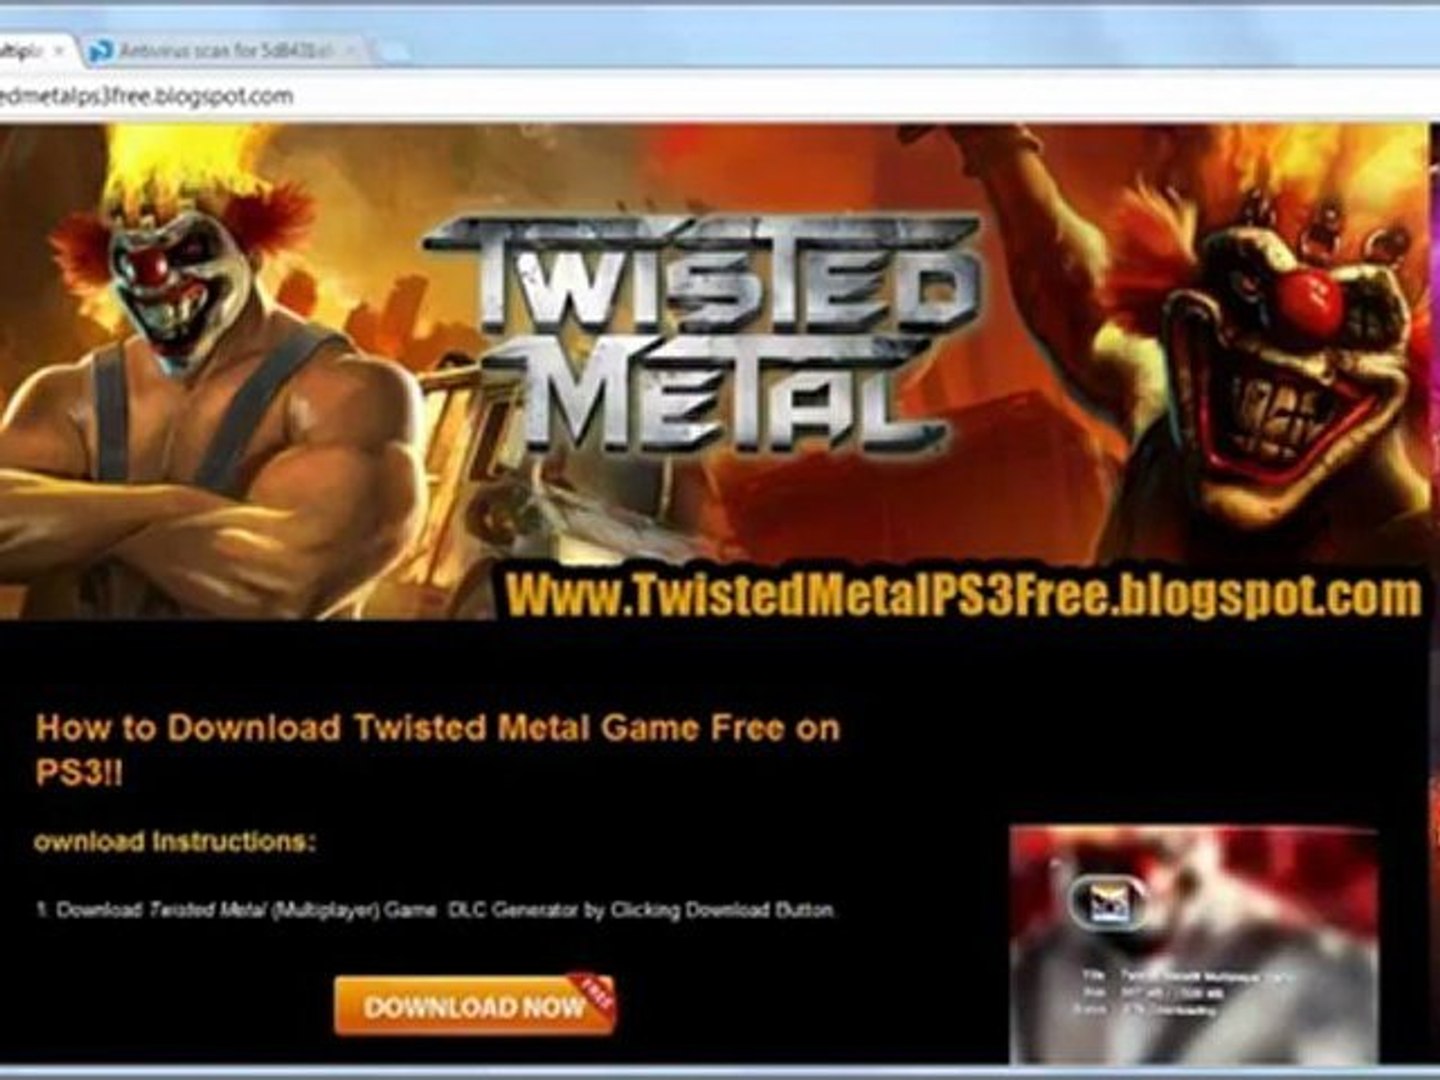 How to Get Twisted Metal Game Crack Free On PS3!! - video Dailymotion